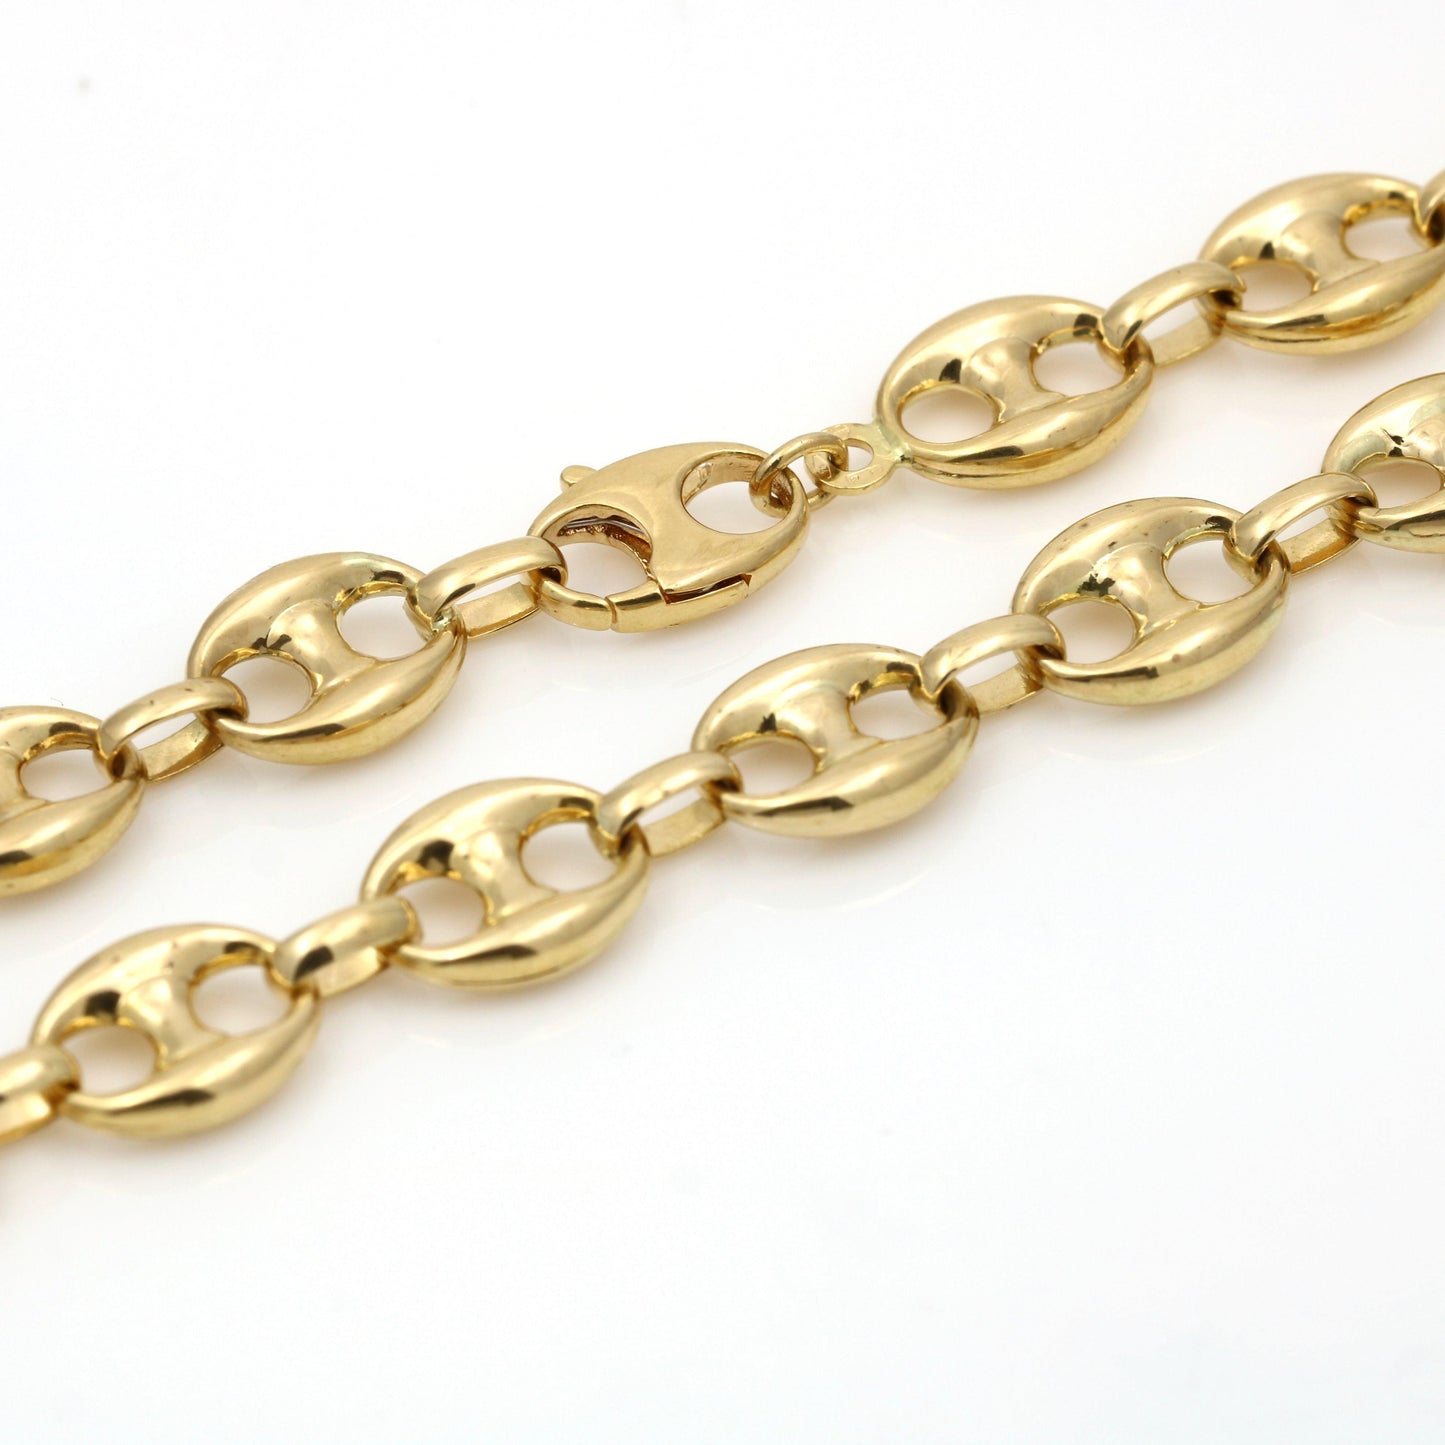 Mariner's Puff Link 10.5mm 18k Yellow Gold Chain Necklace 20" - 31 Jewels Inc.